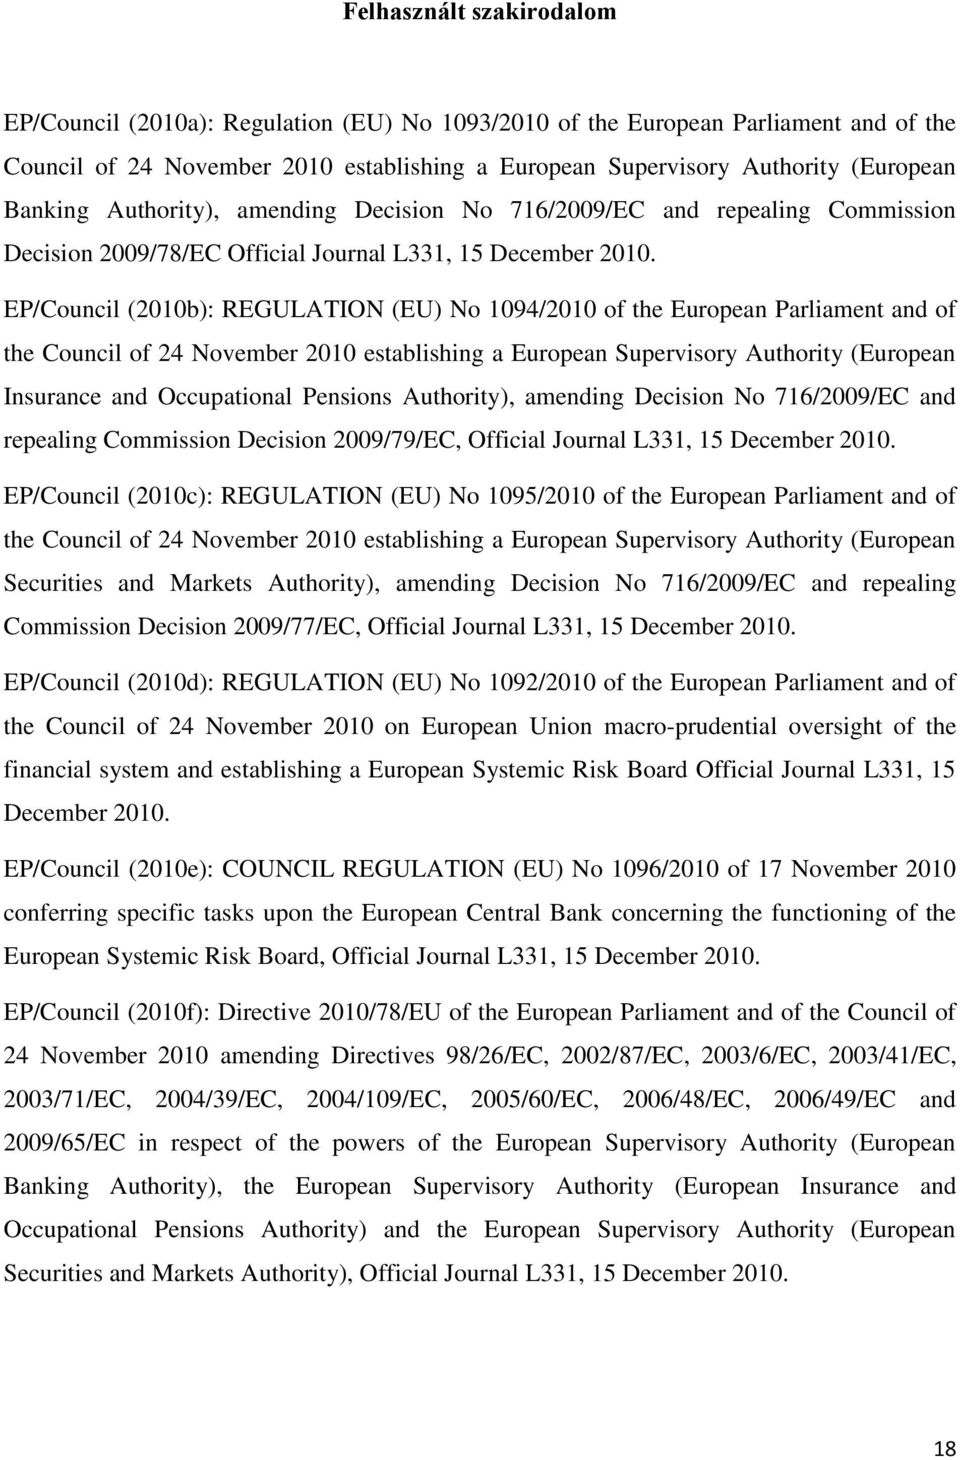 EP/Council (2010b): REGULATION (EU) No 1094/2010 of the European Parliament and of the Council of 24 November 2010 establishing a European Supervisory Authority (European Insurance and Occupational